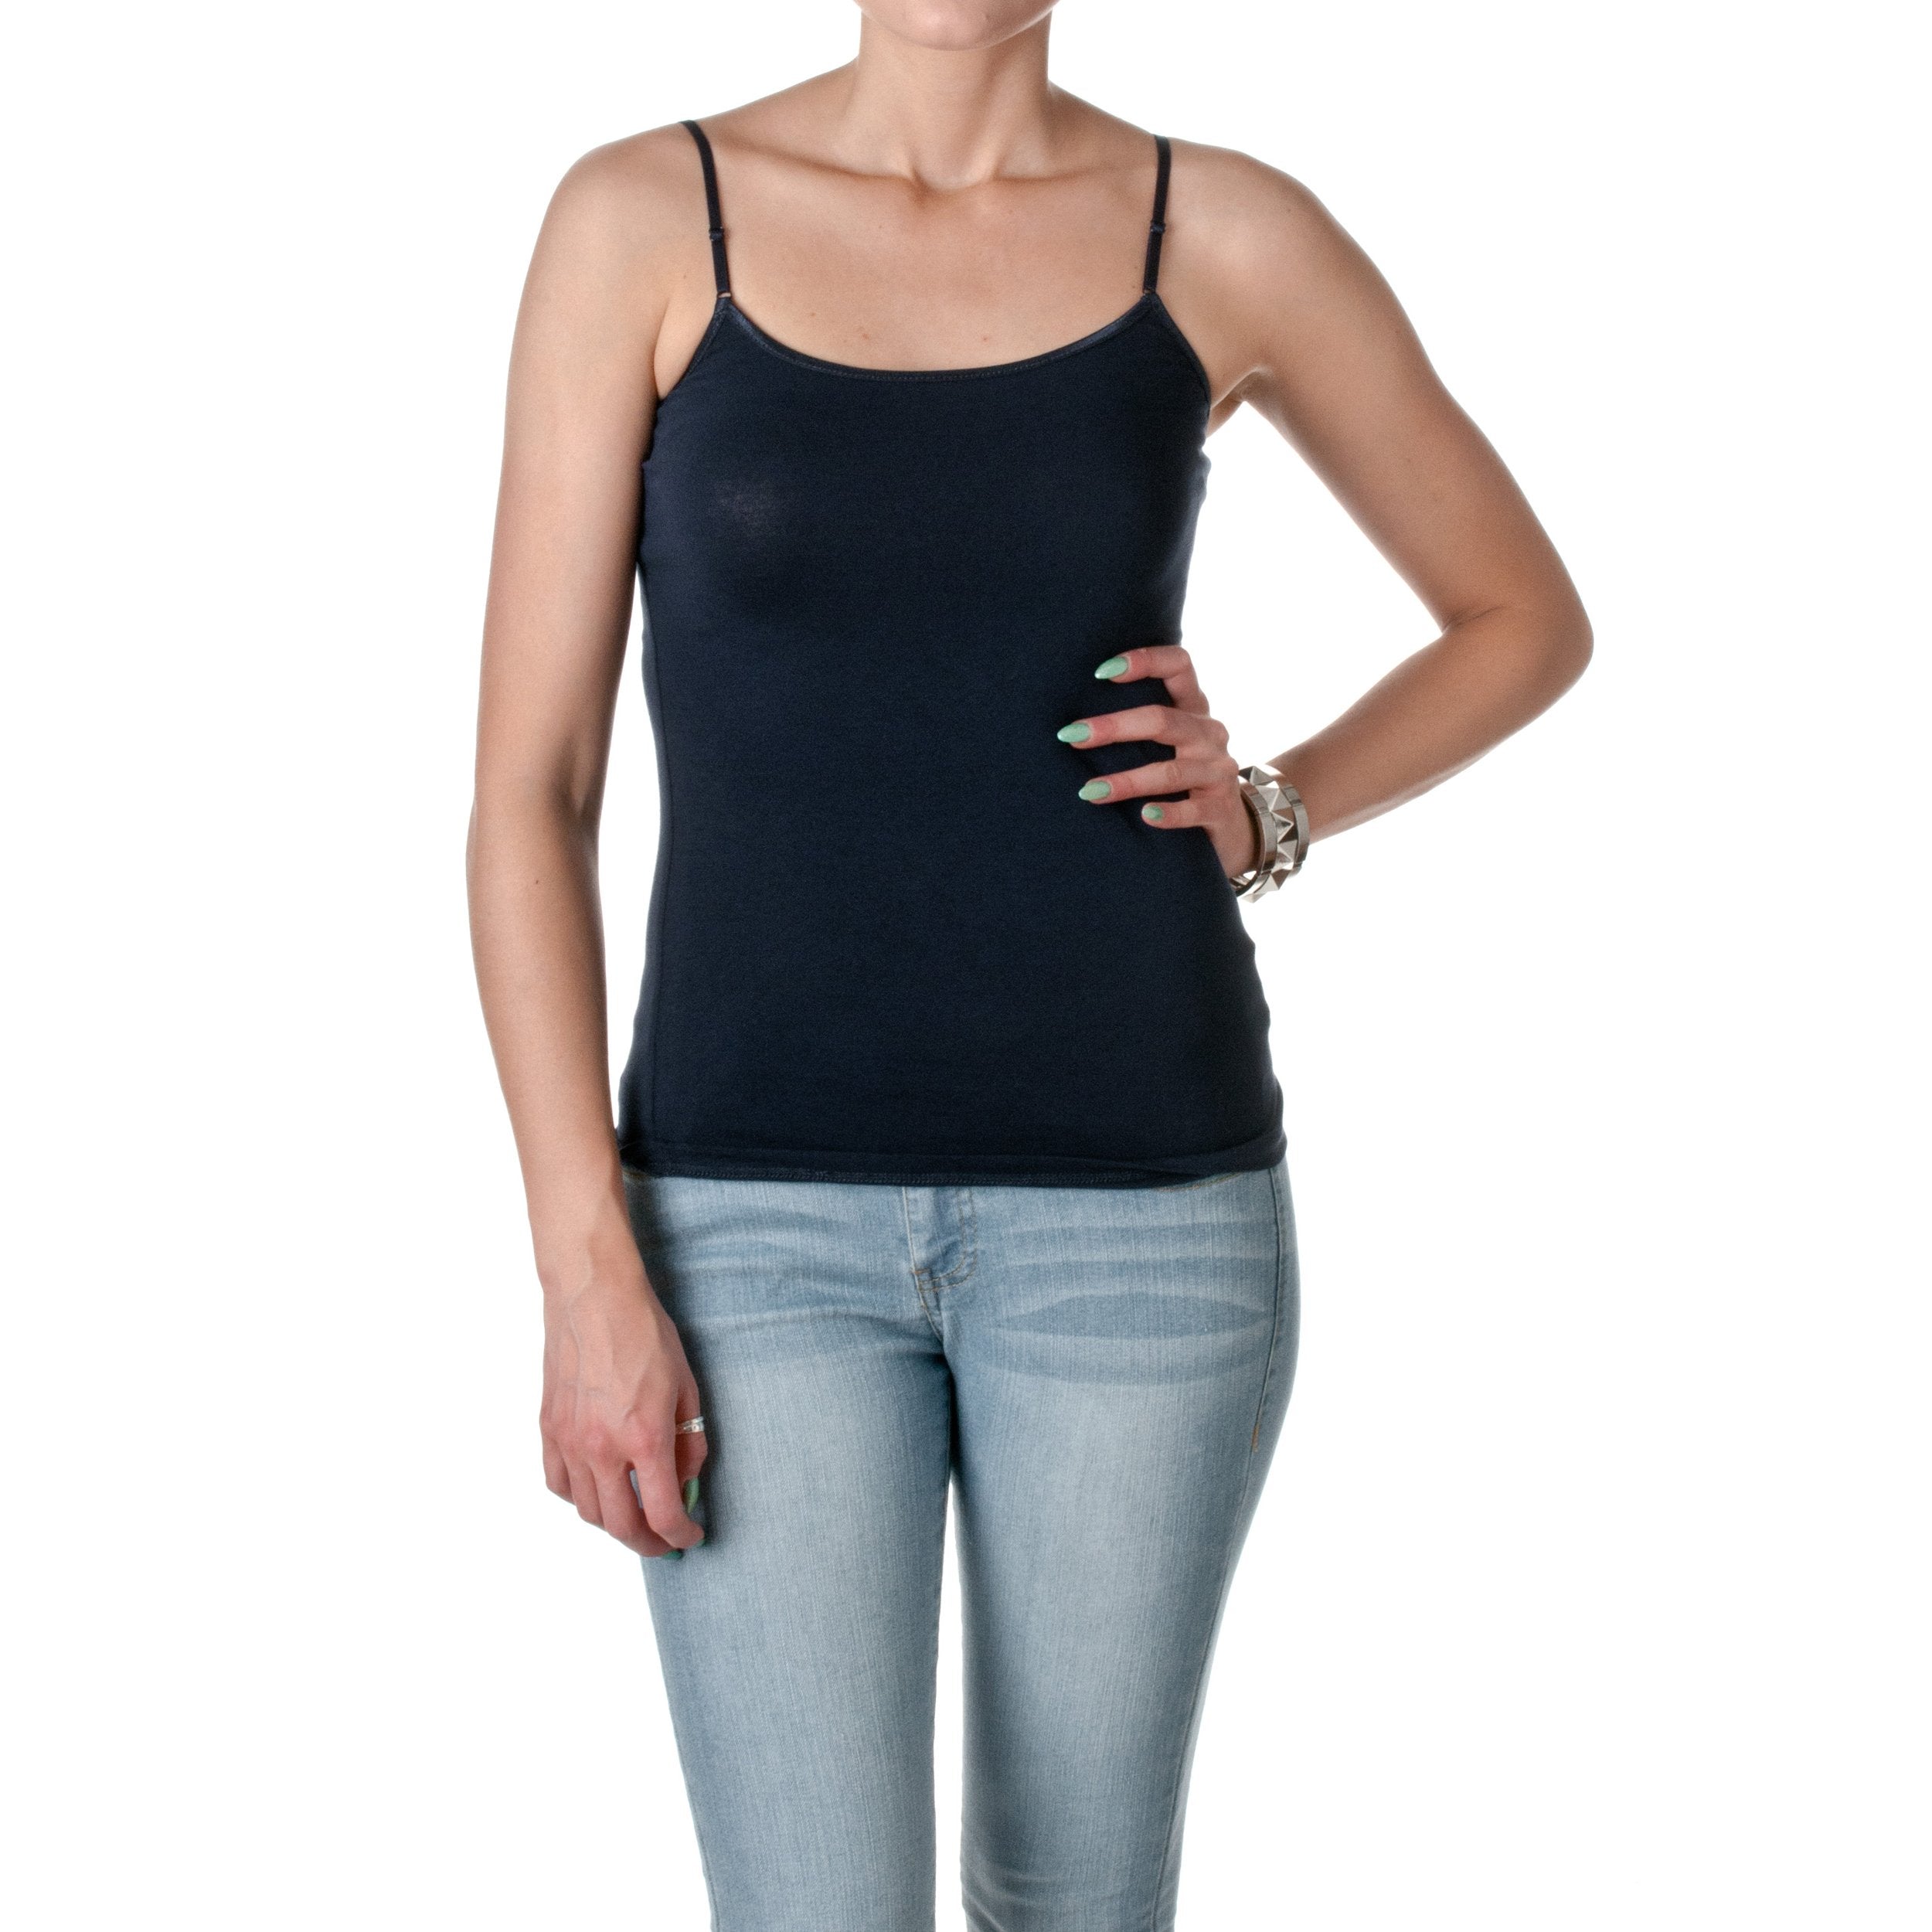 Hollywood Star Fashion Casual Basic Women's Semi-Crop Camisole Cami Tank Top With Adjustable Straps